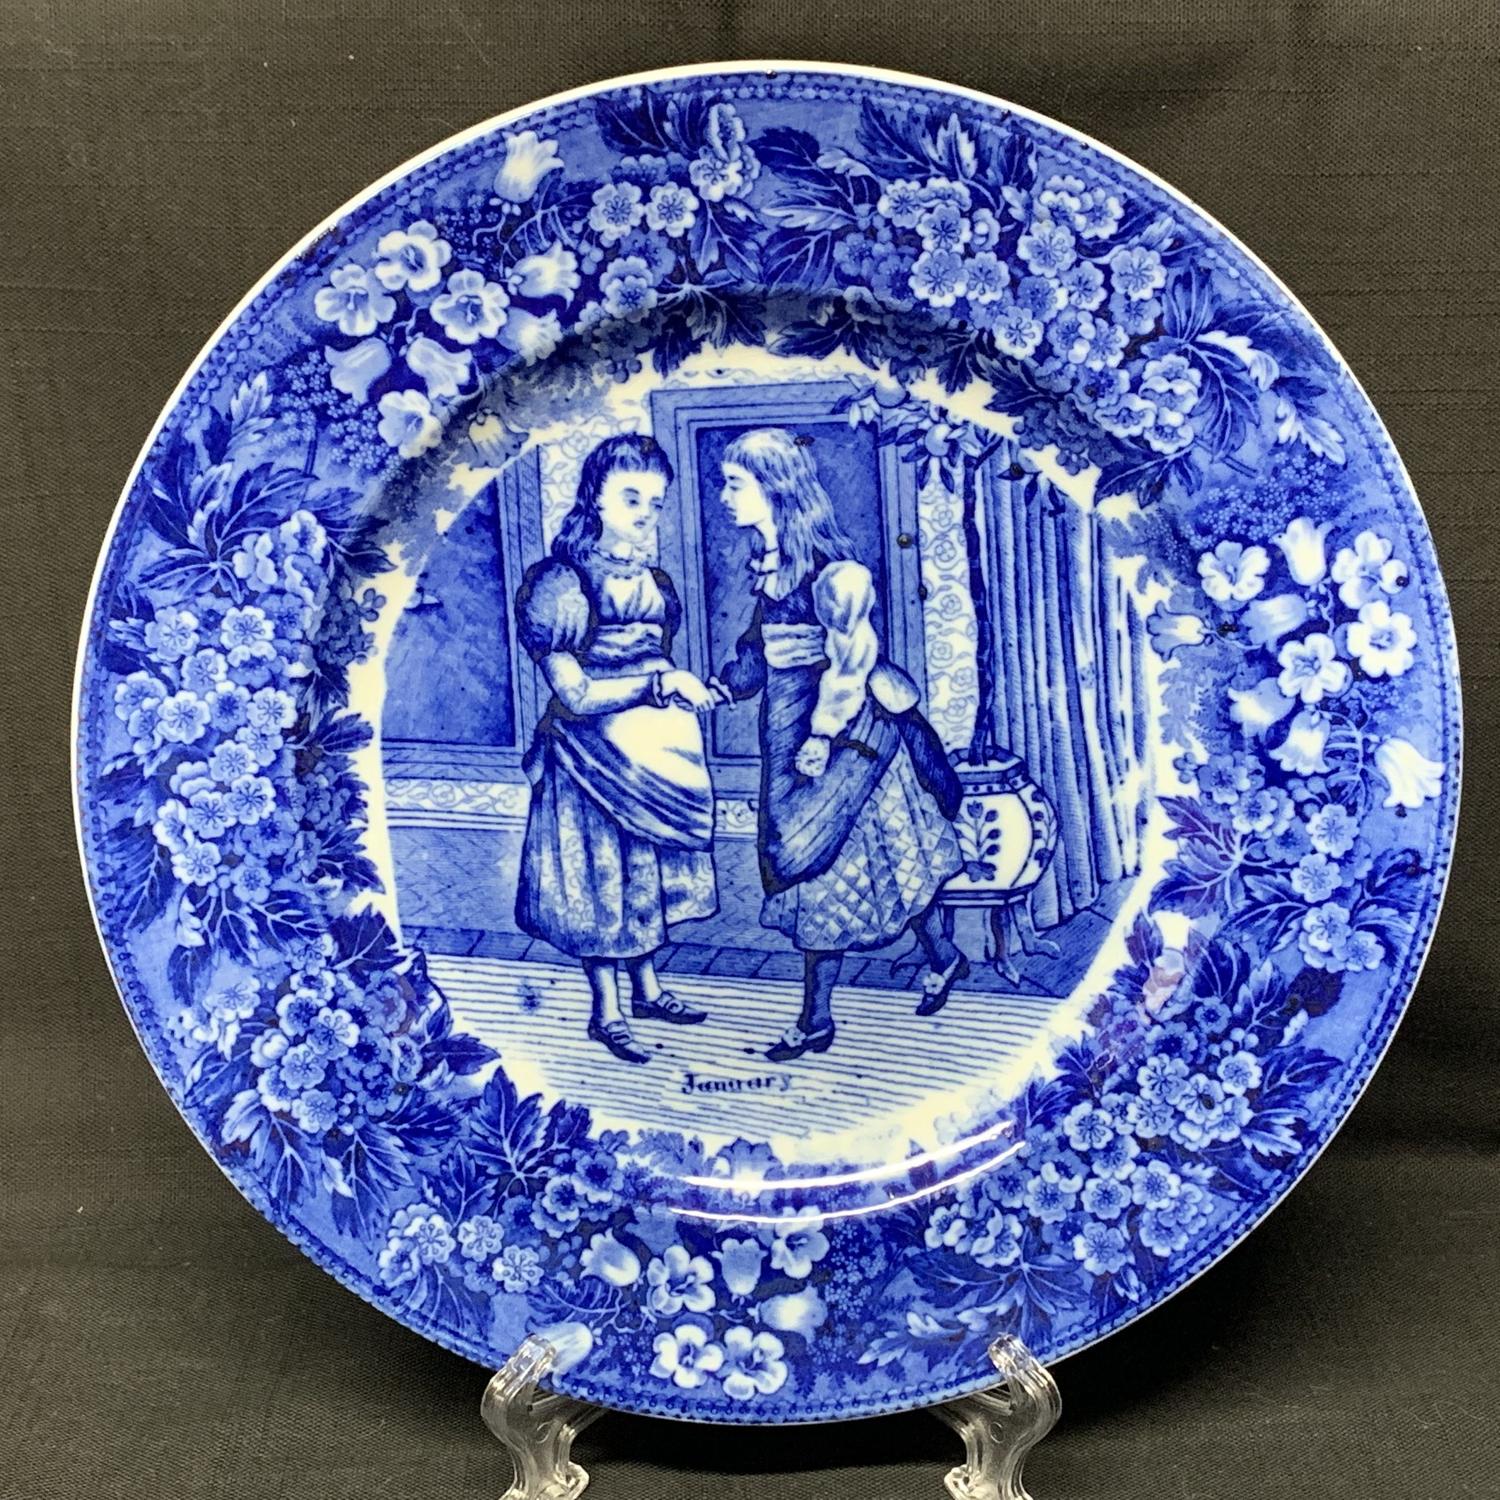 1898 ~ Wedgwood Months Plate ~ JANUARY ~ Girl Friends